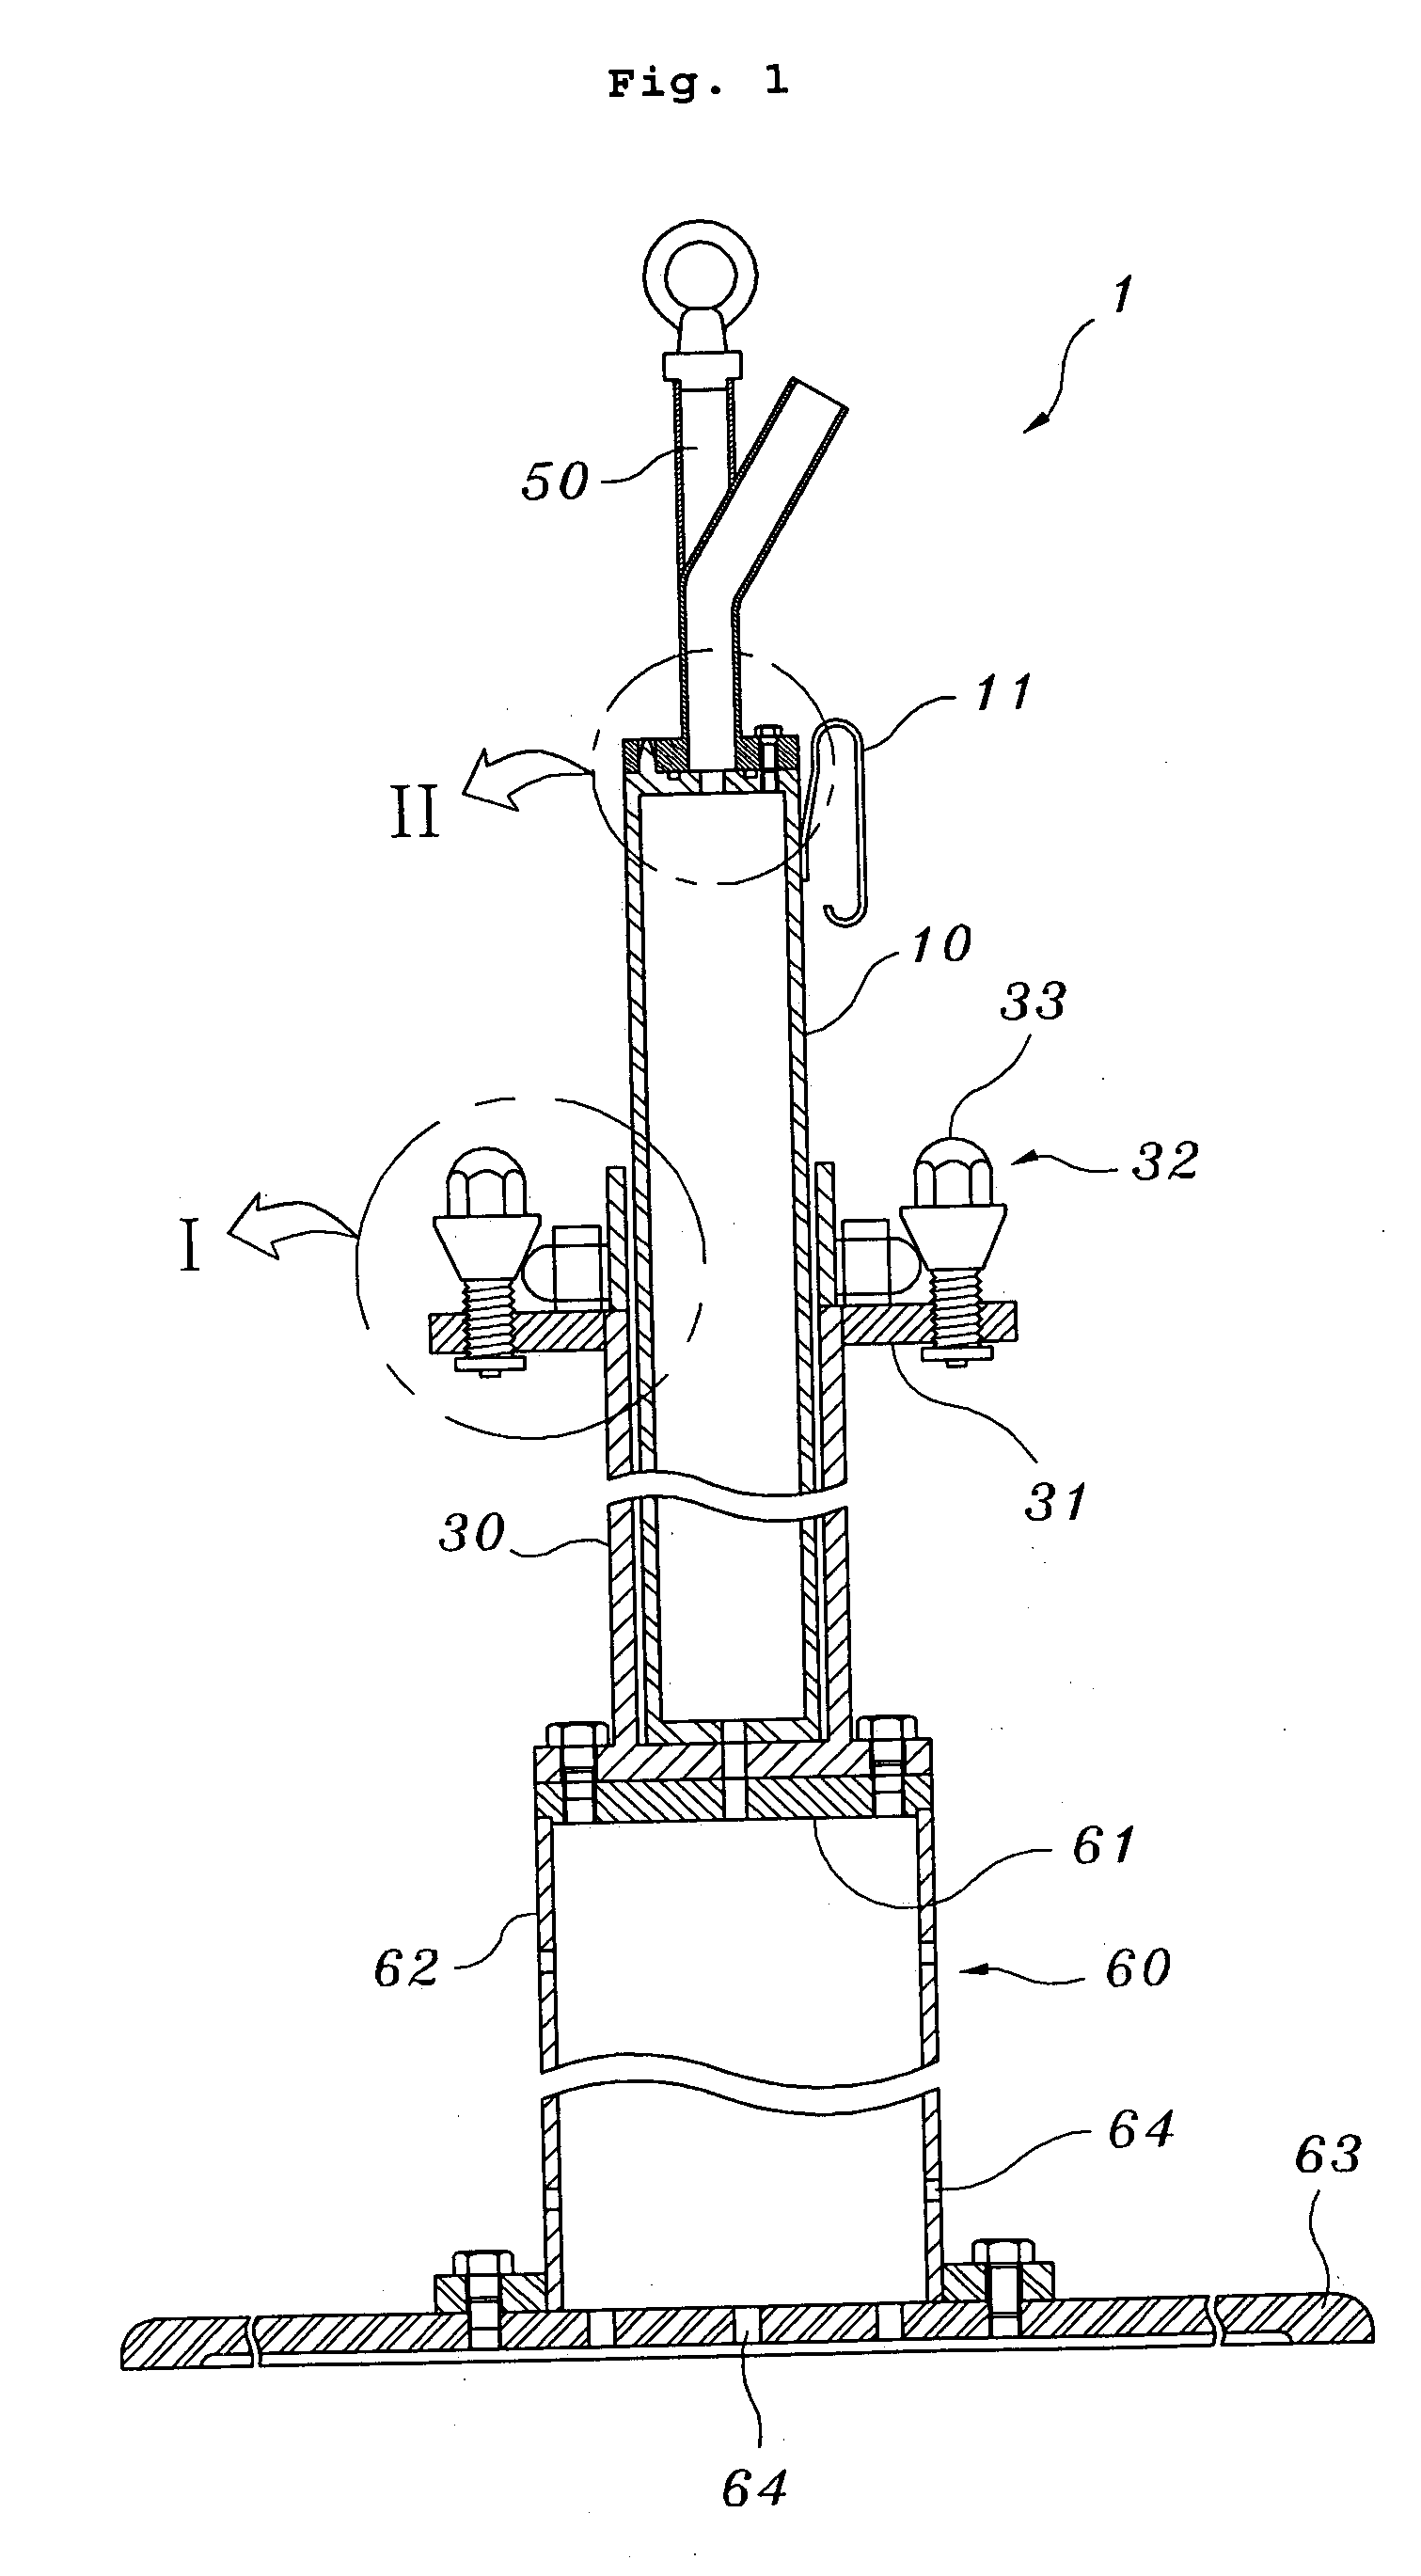 Capsule assembling apparatus for neutron re-irradiation experiments